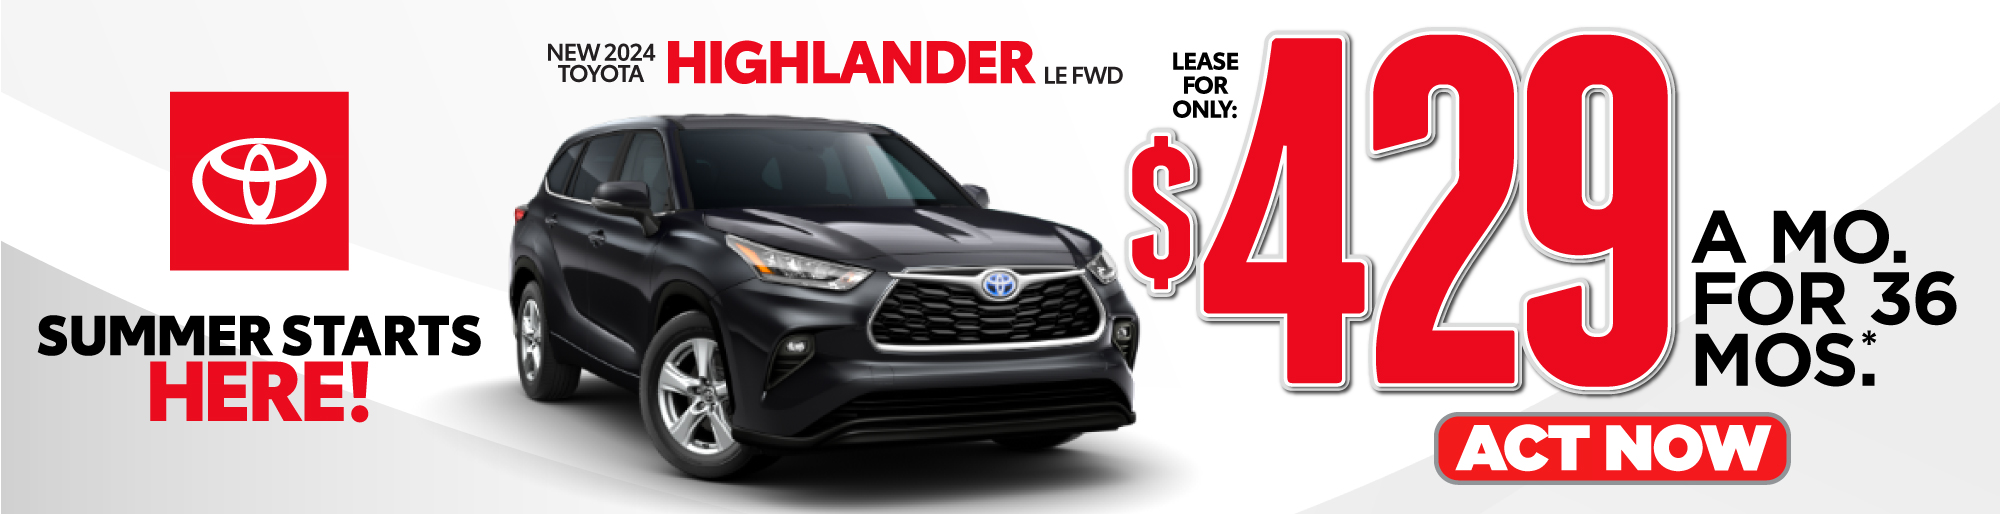 New 2022 Toyota Highlander Lease for only $399/mo.* ACT NOW